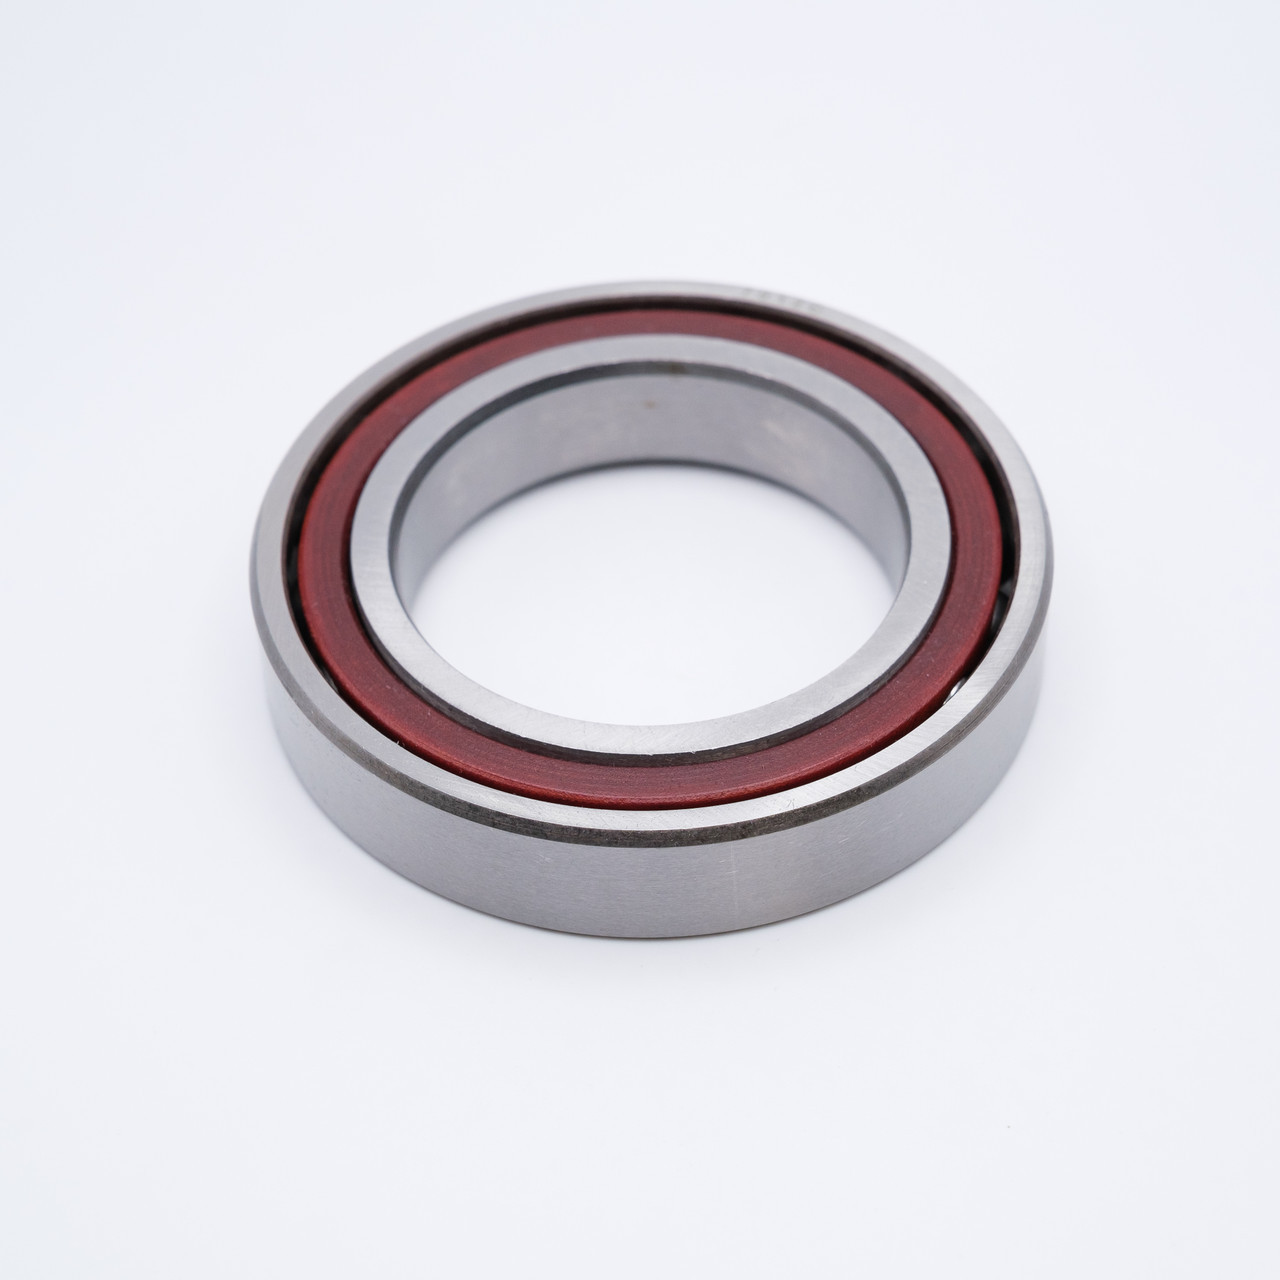 7304C Precision 15 Degree Angular Contact Ball Bearing 20x52x15mm Front View